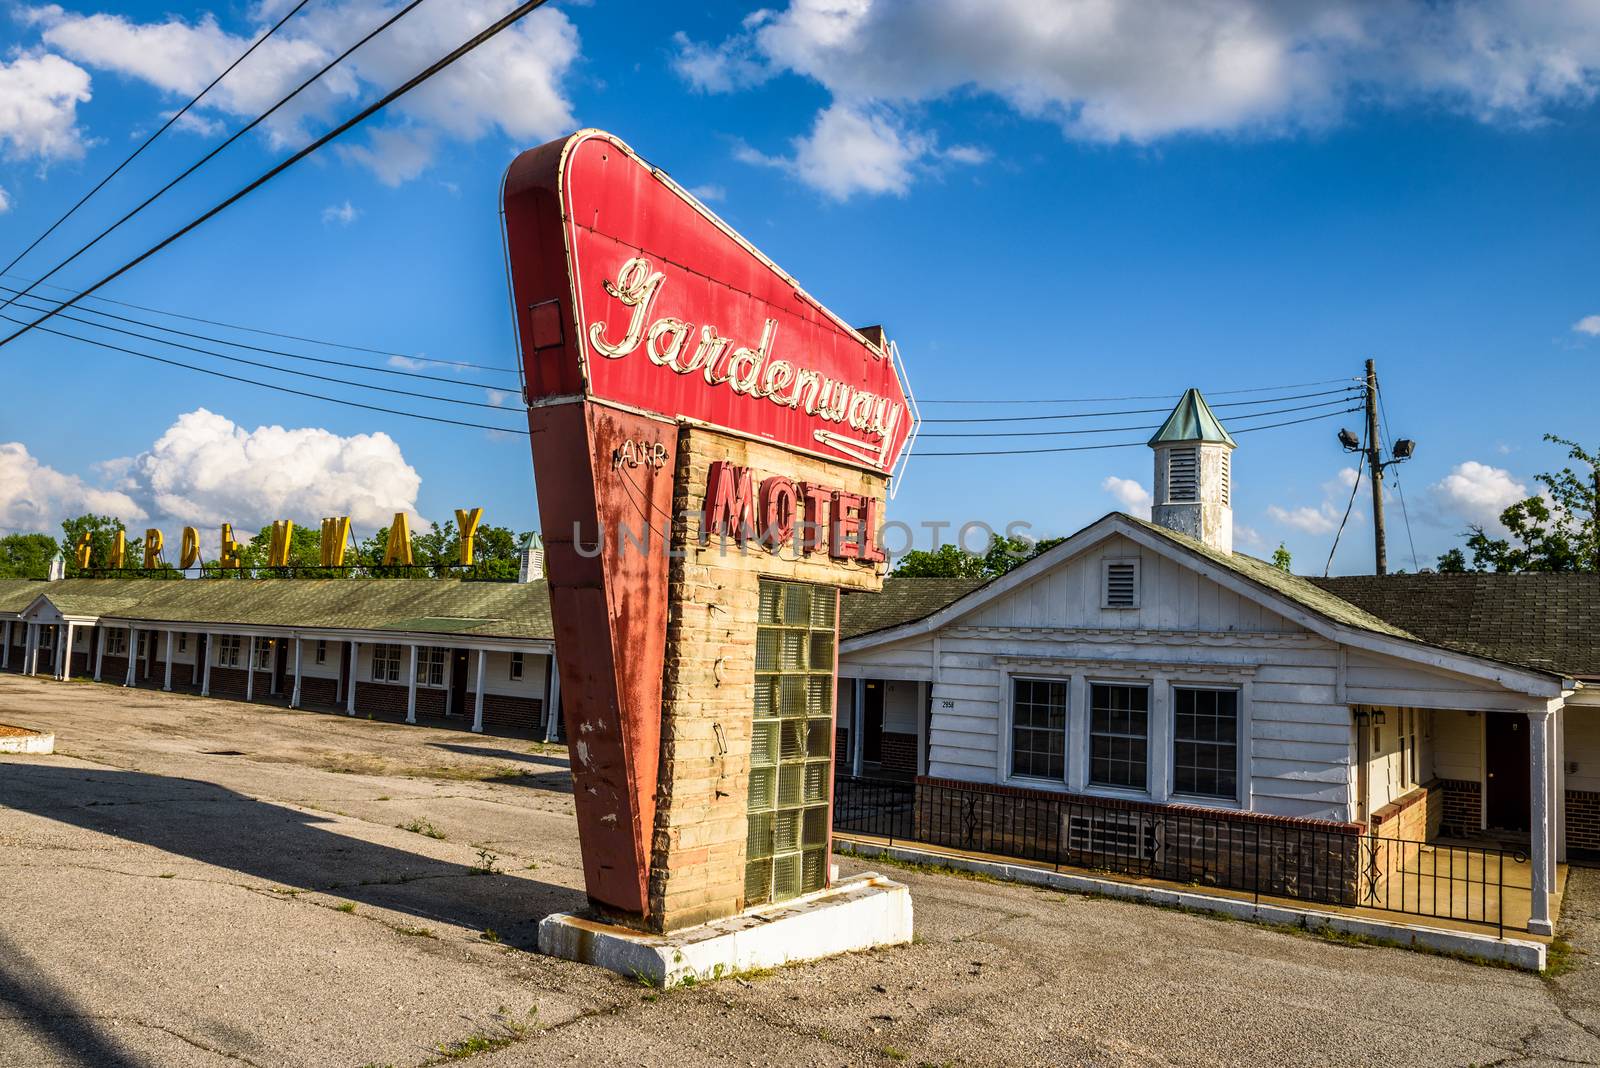 Abandoned motel on historic route 66 in Missouri by nickfox